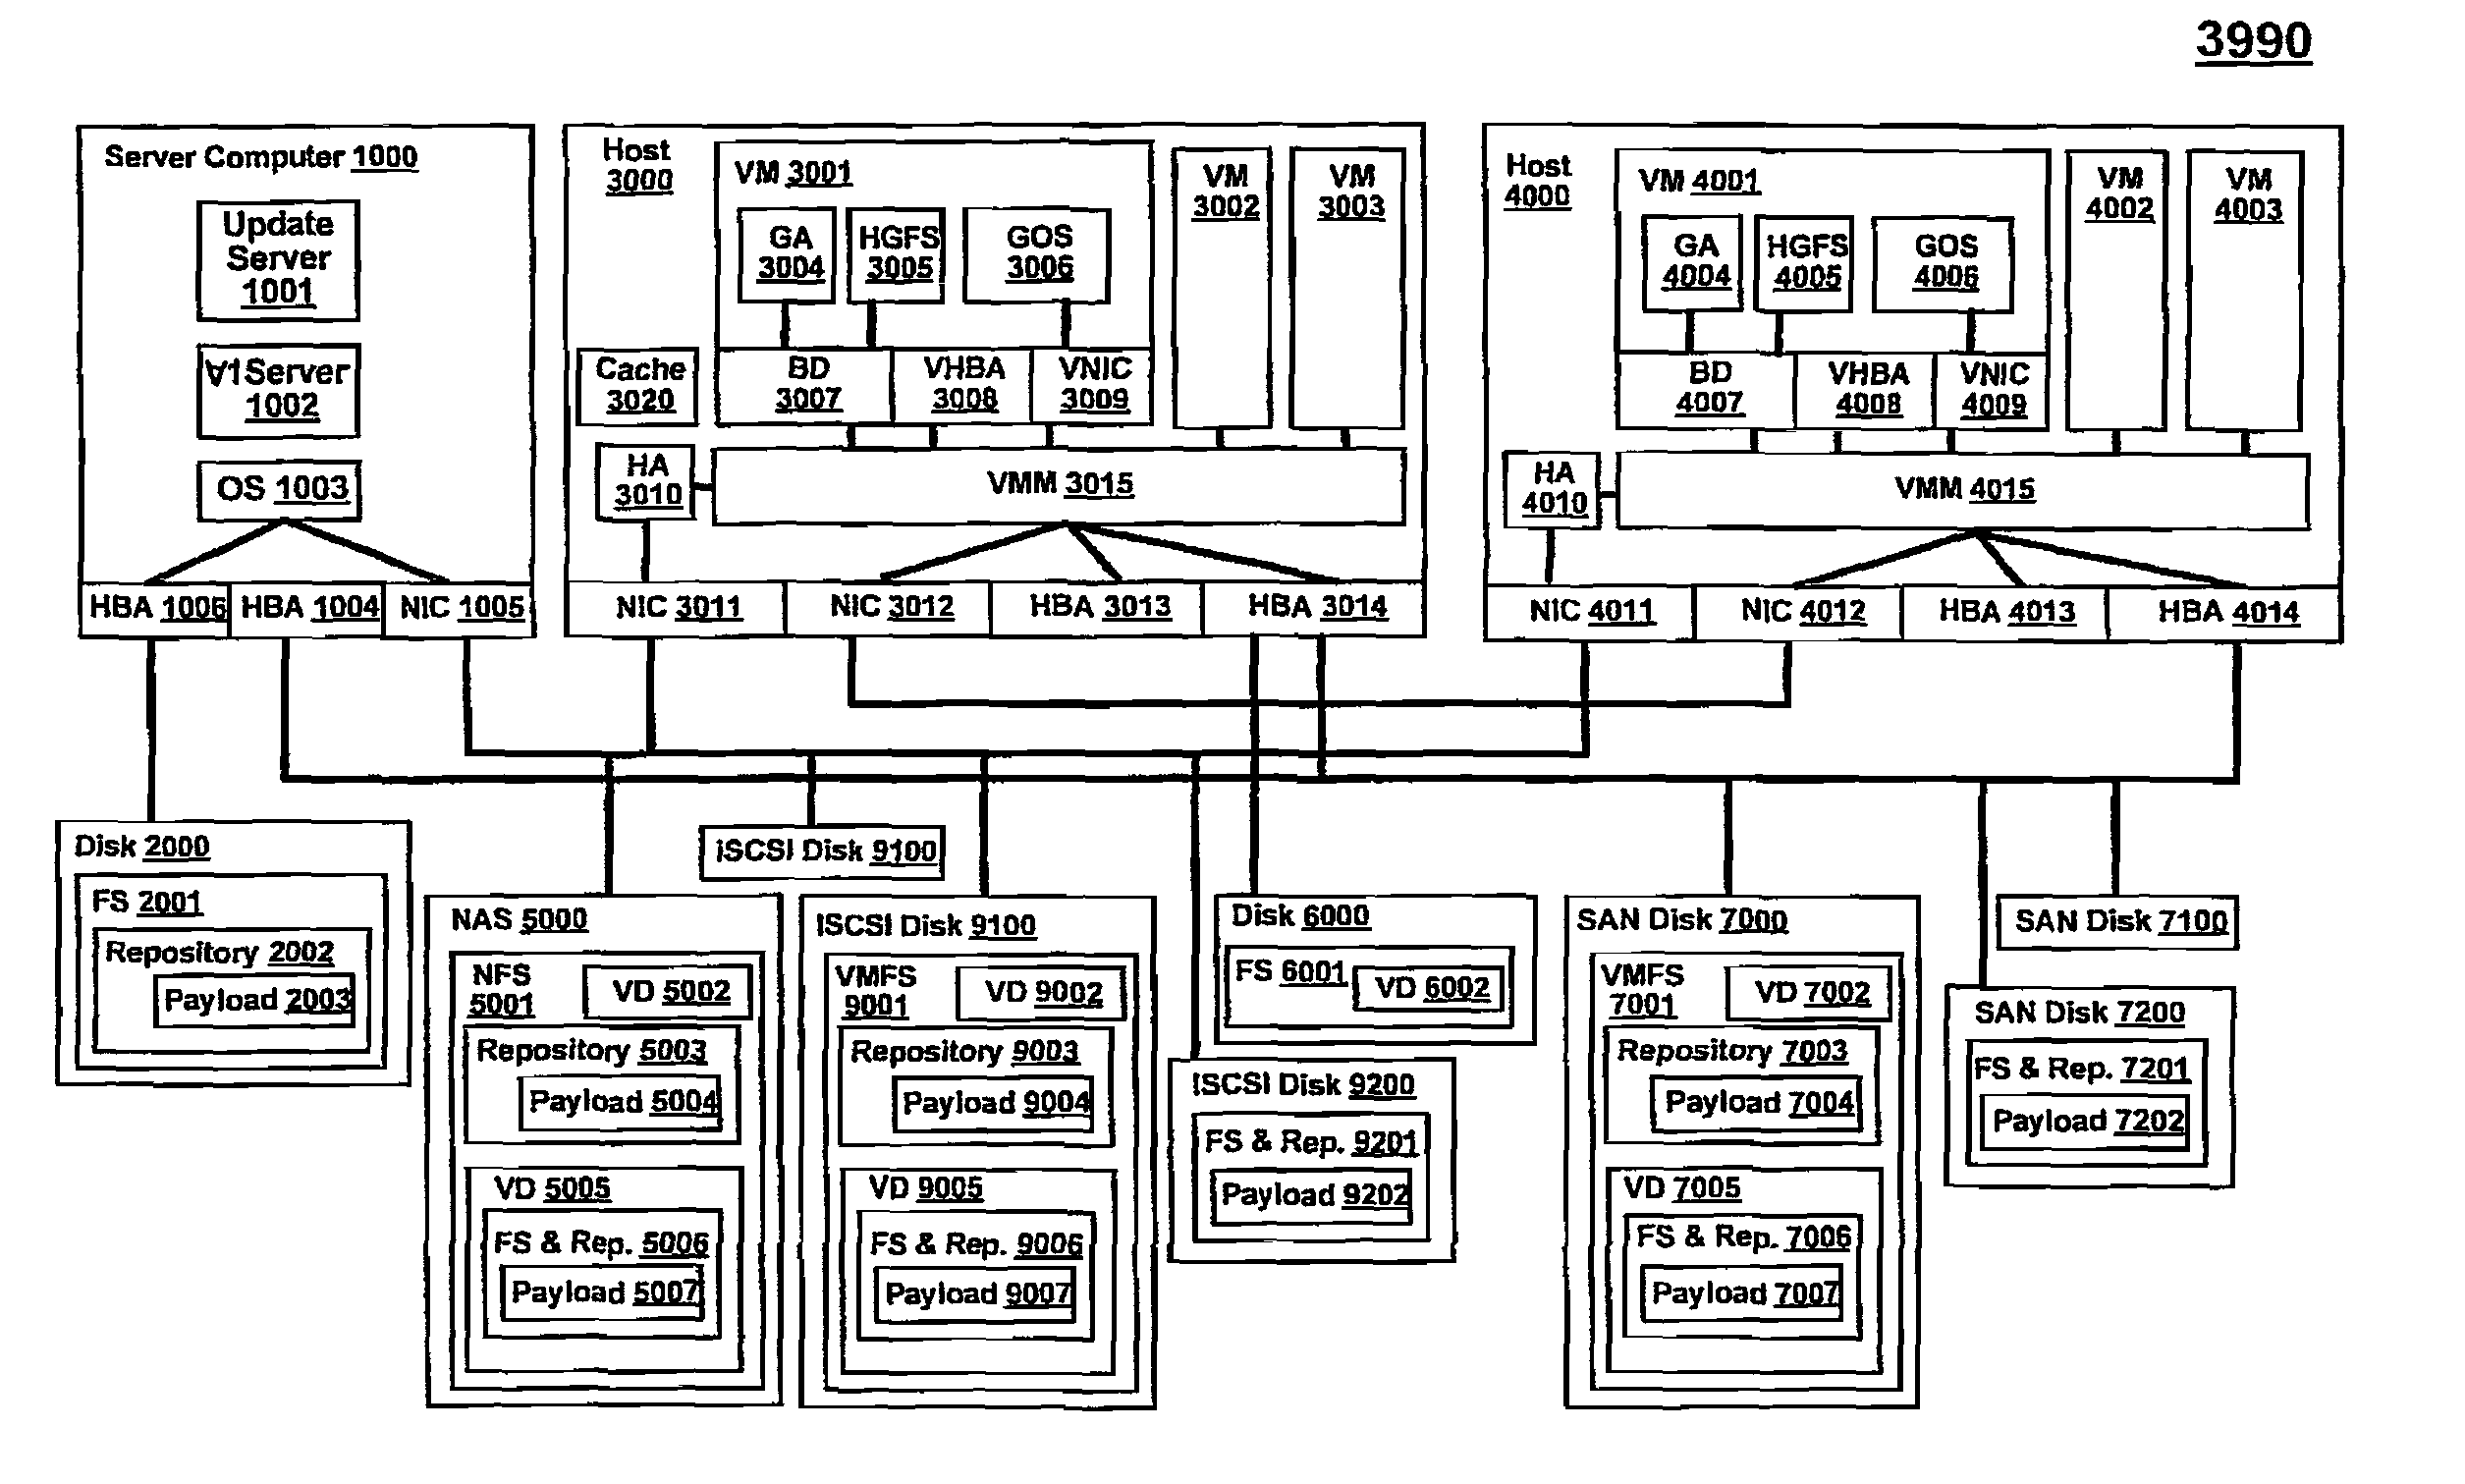 System and method for delivering software update to guest software on virtual machines through a backdoor software communication pipe thereof